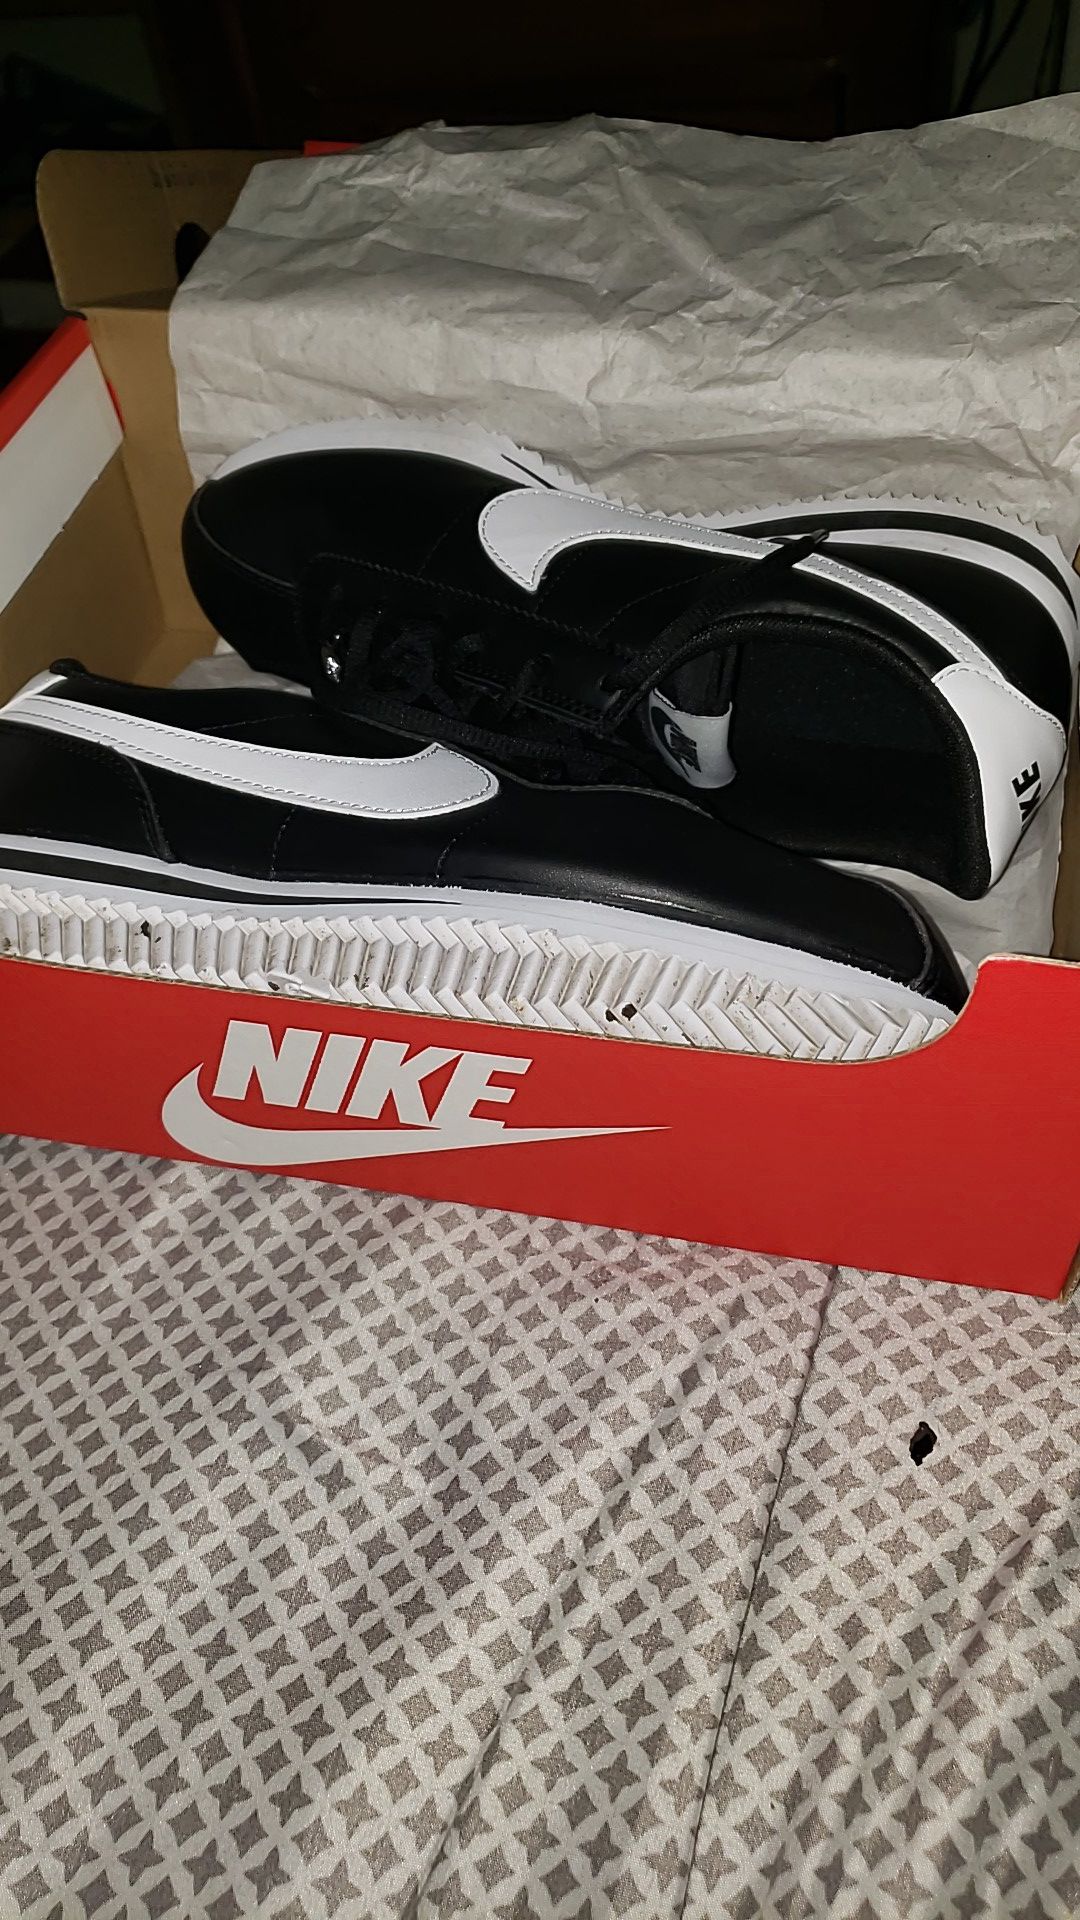 Brand new Nike Cortez Shoes